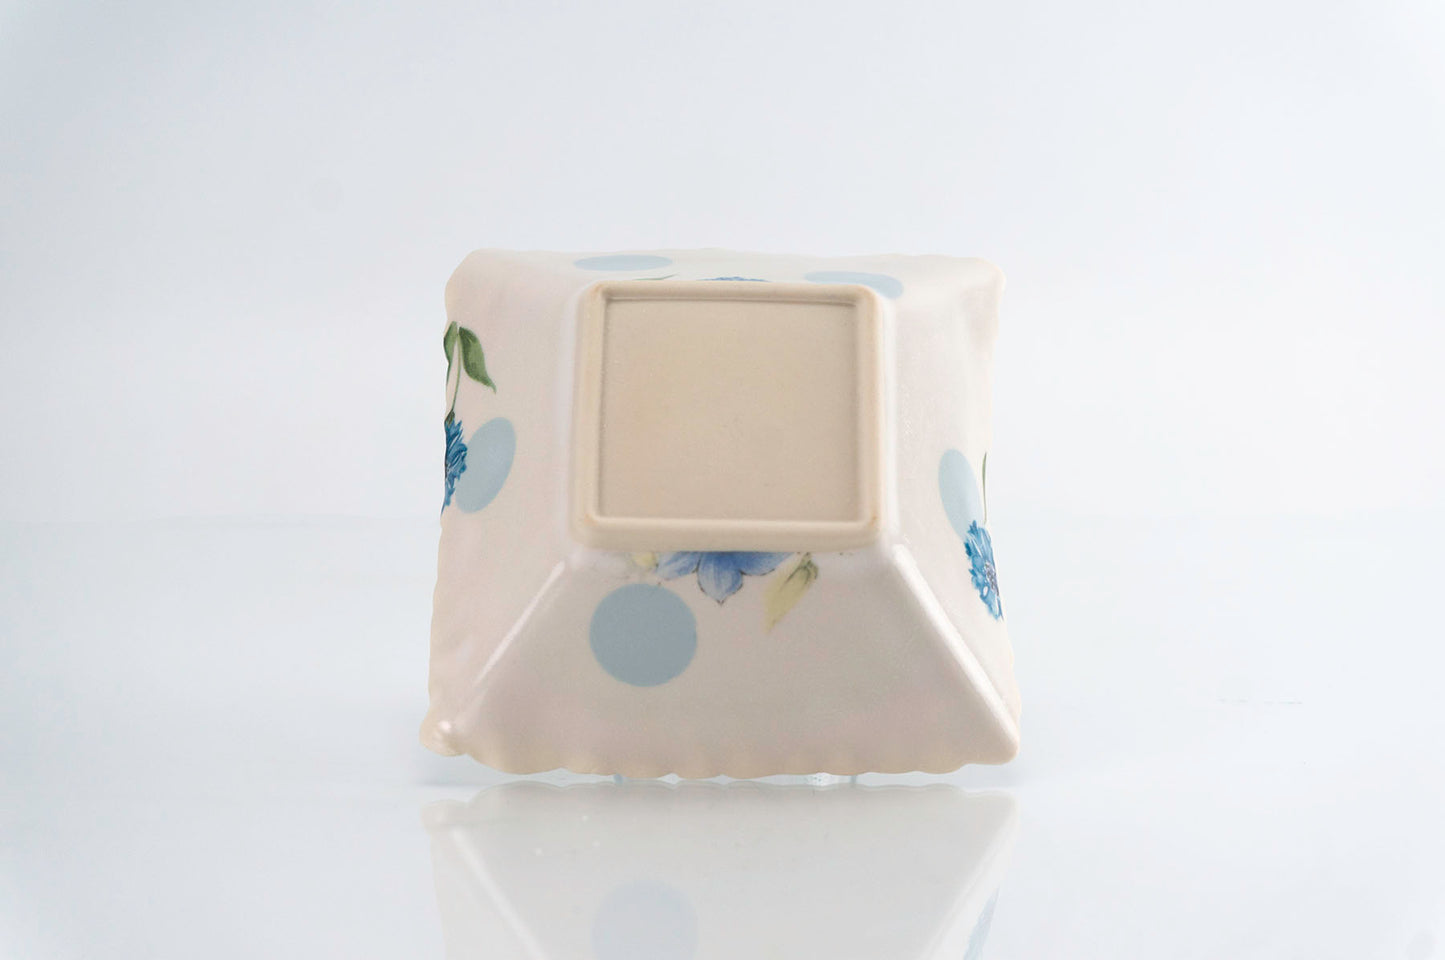 Flower and Blue Dot Square Dish (d-119)